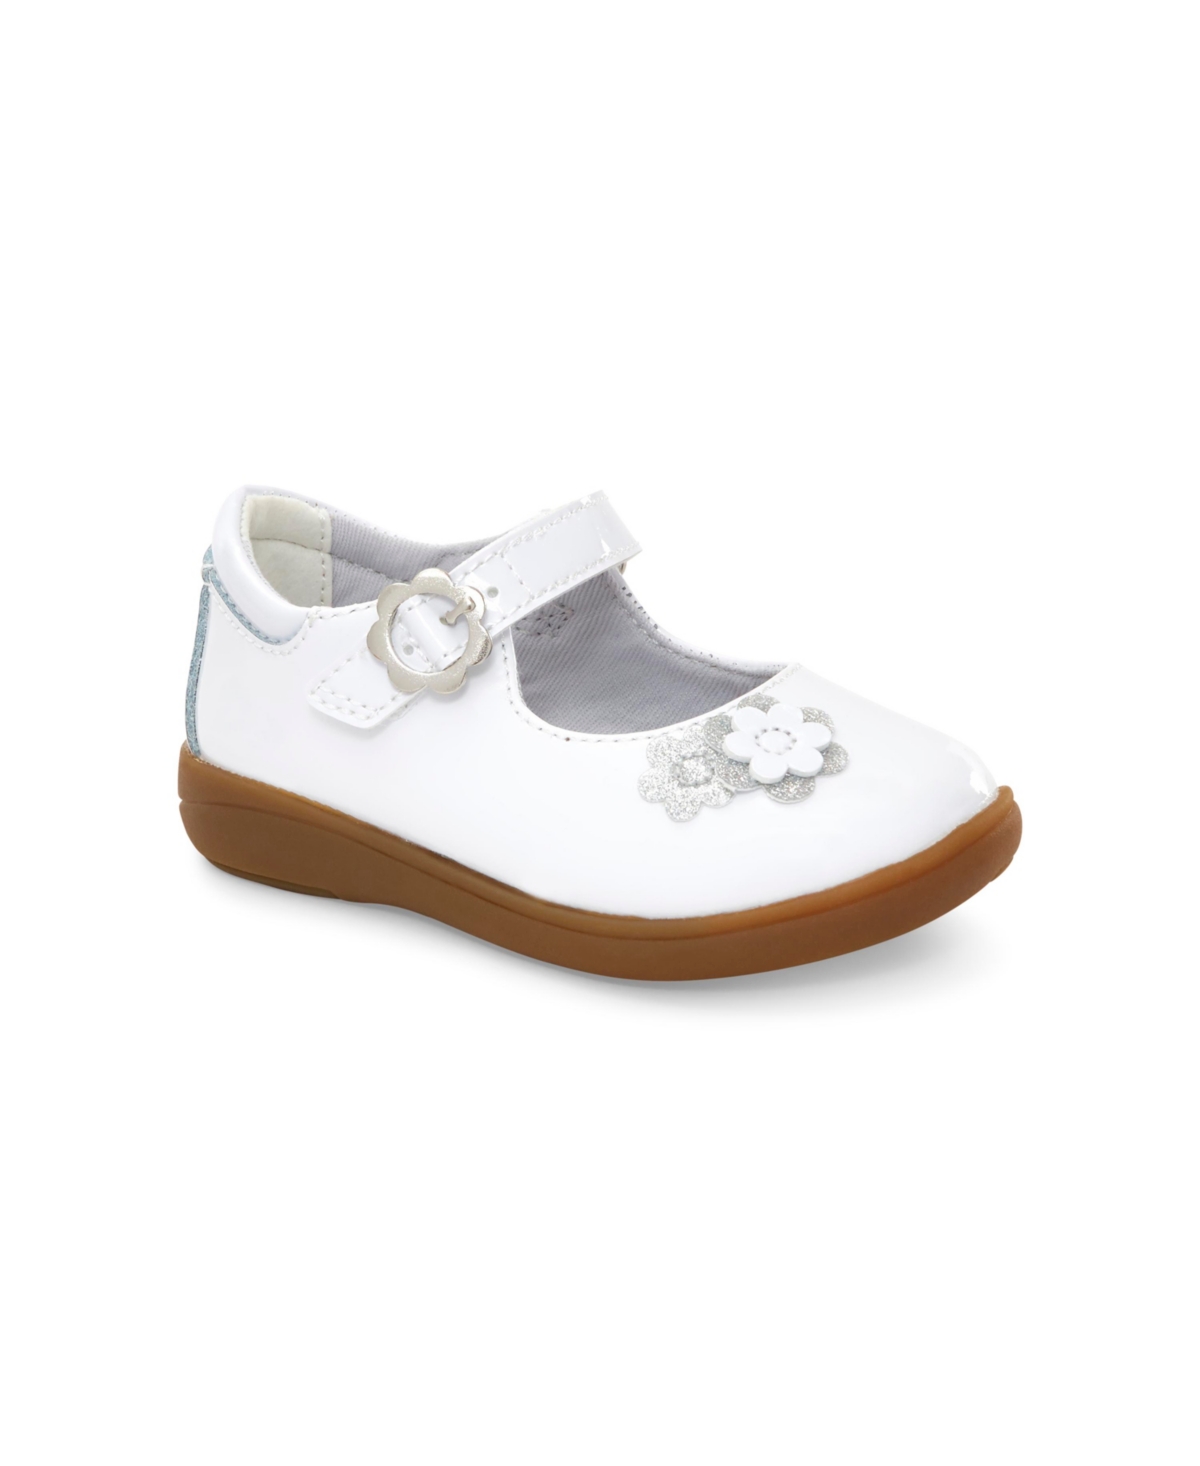 Stride Rite Toddler Girls Holly Leather Shoes In White Patent